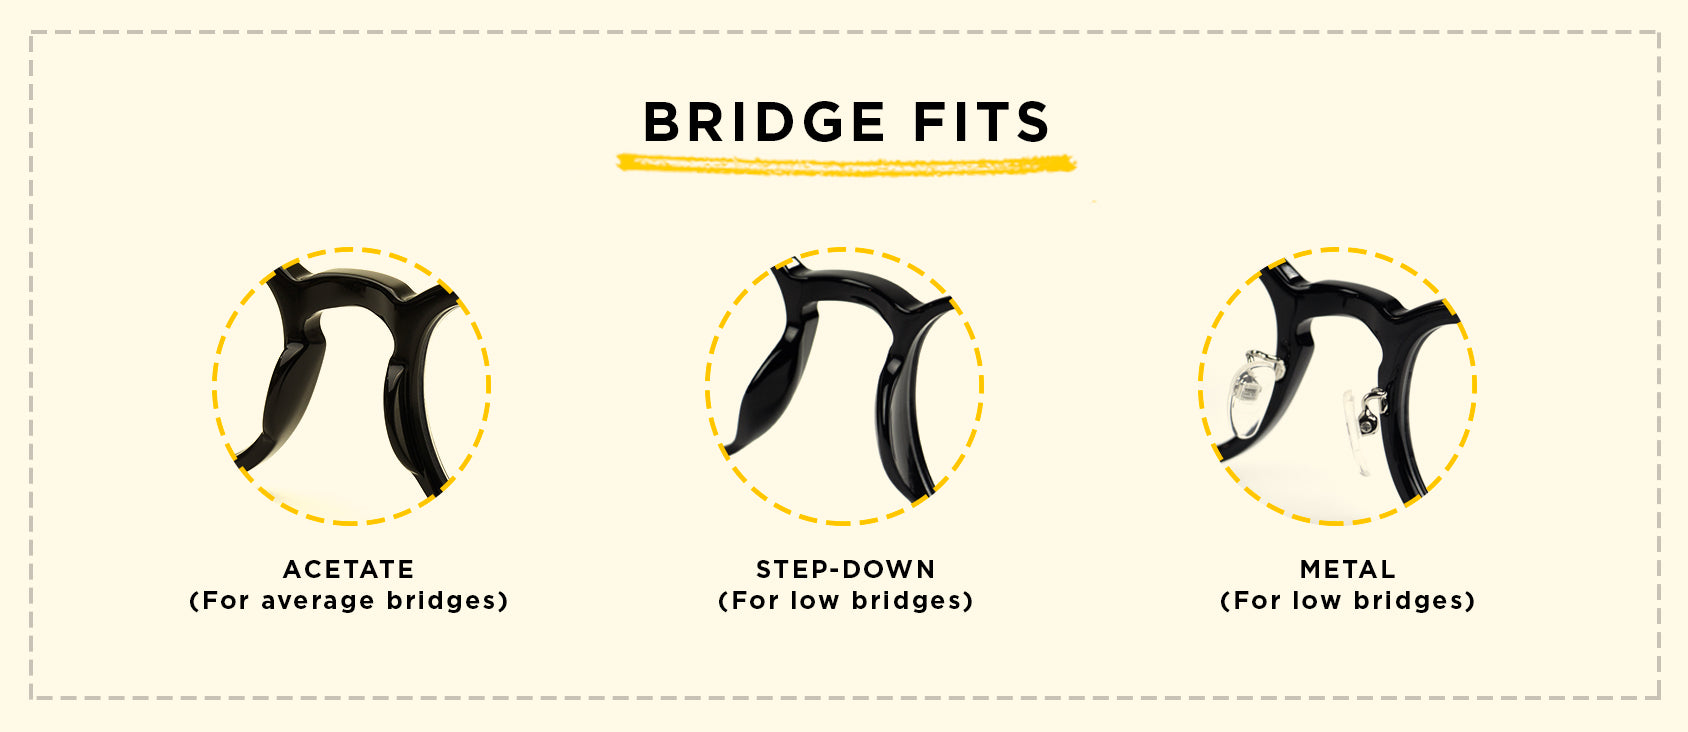 What Does Low Bridge Fit Mean? | MOSCOT Blog